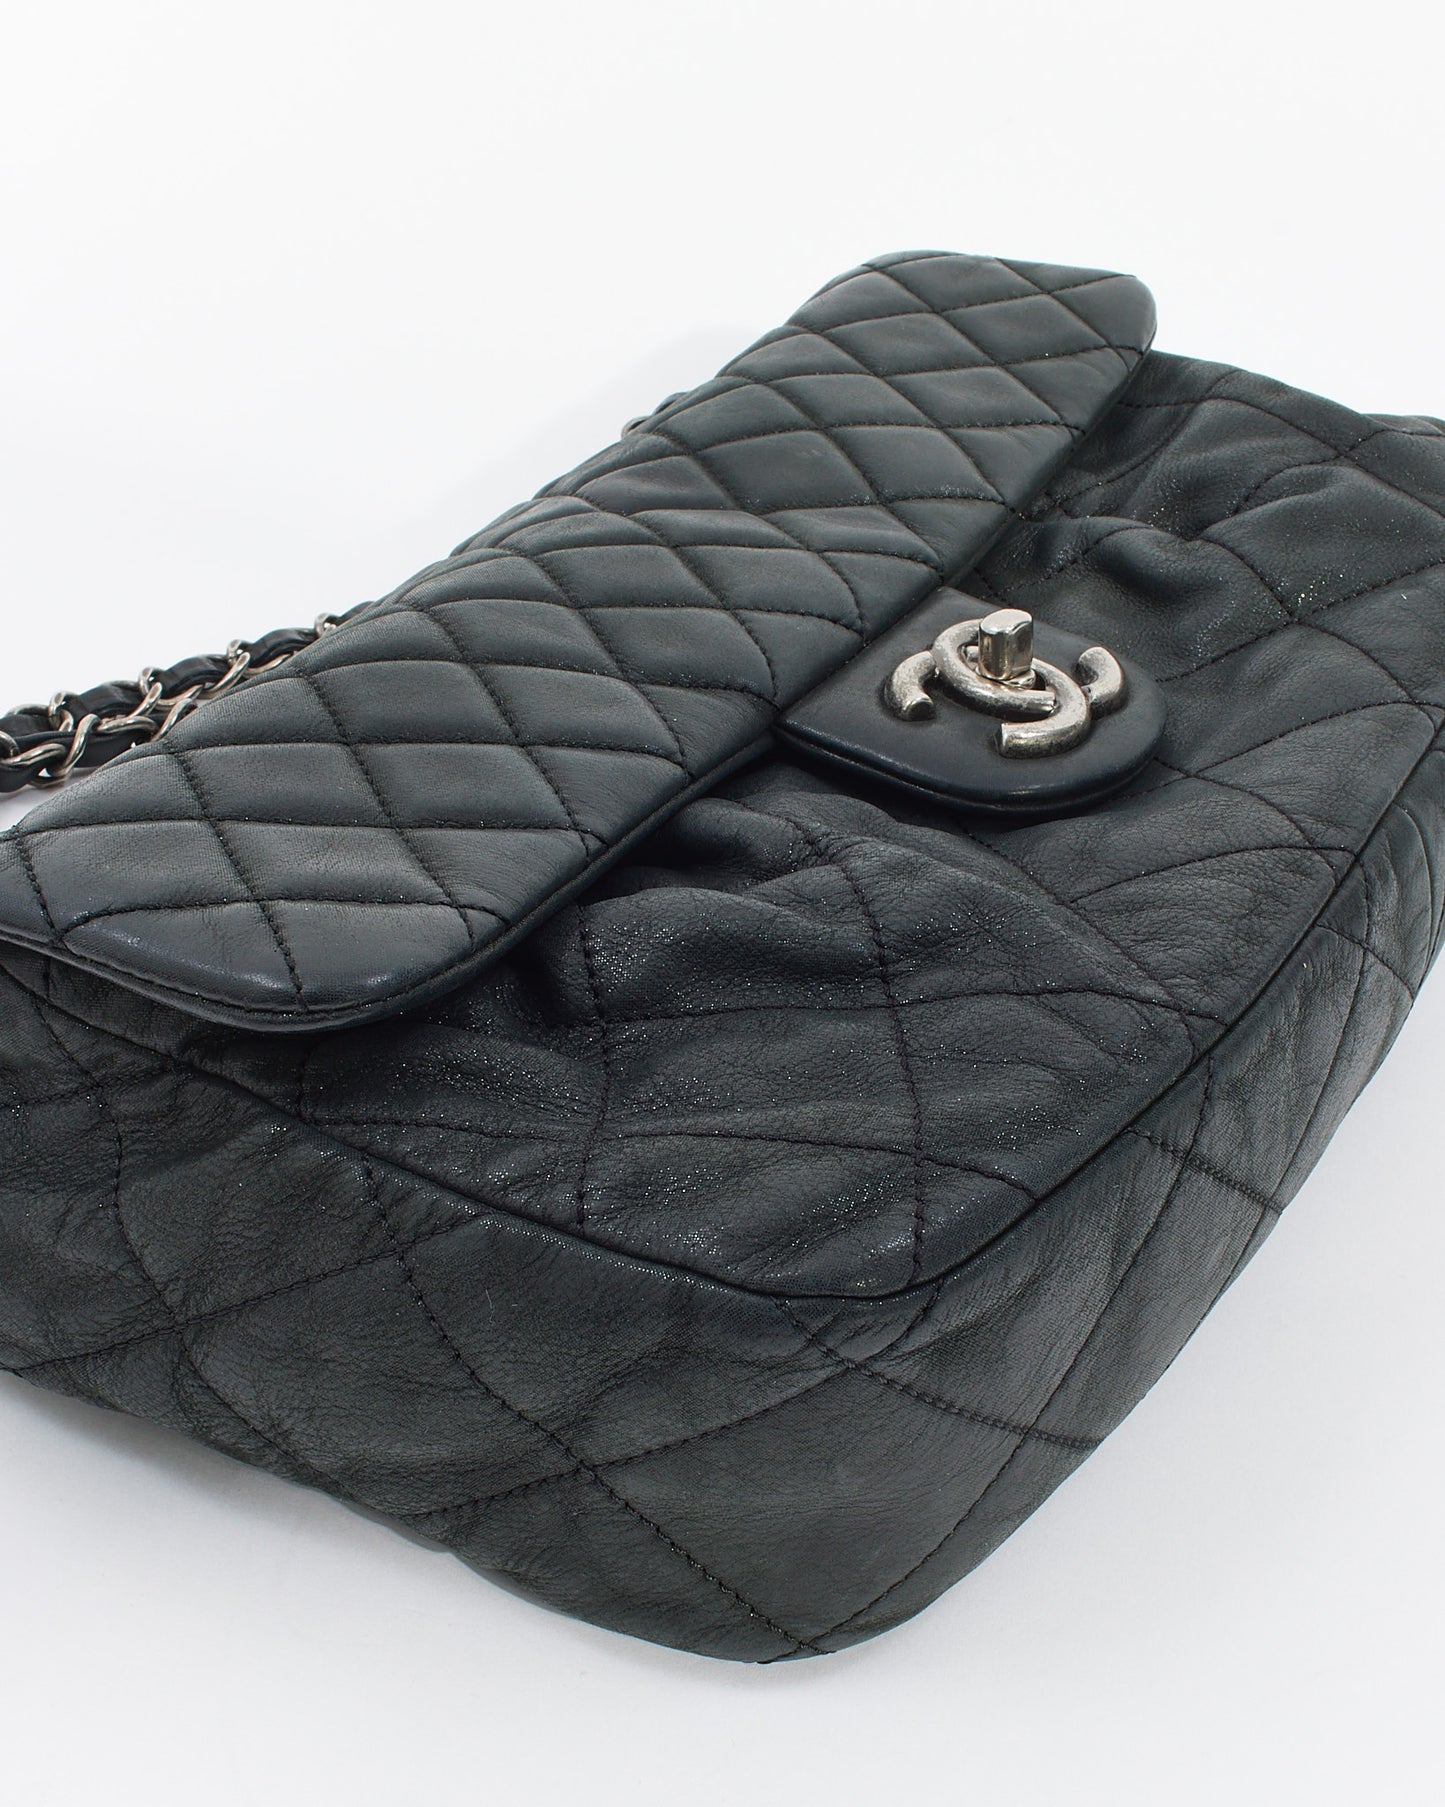 Chanel Black Quilted Iridescent Leather East West Single Flap Bag